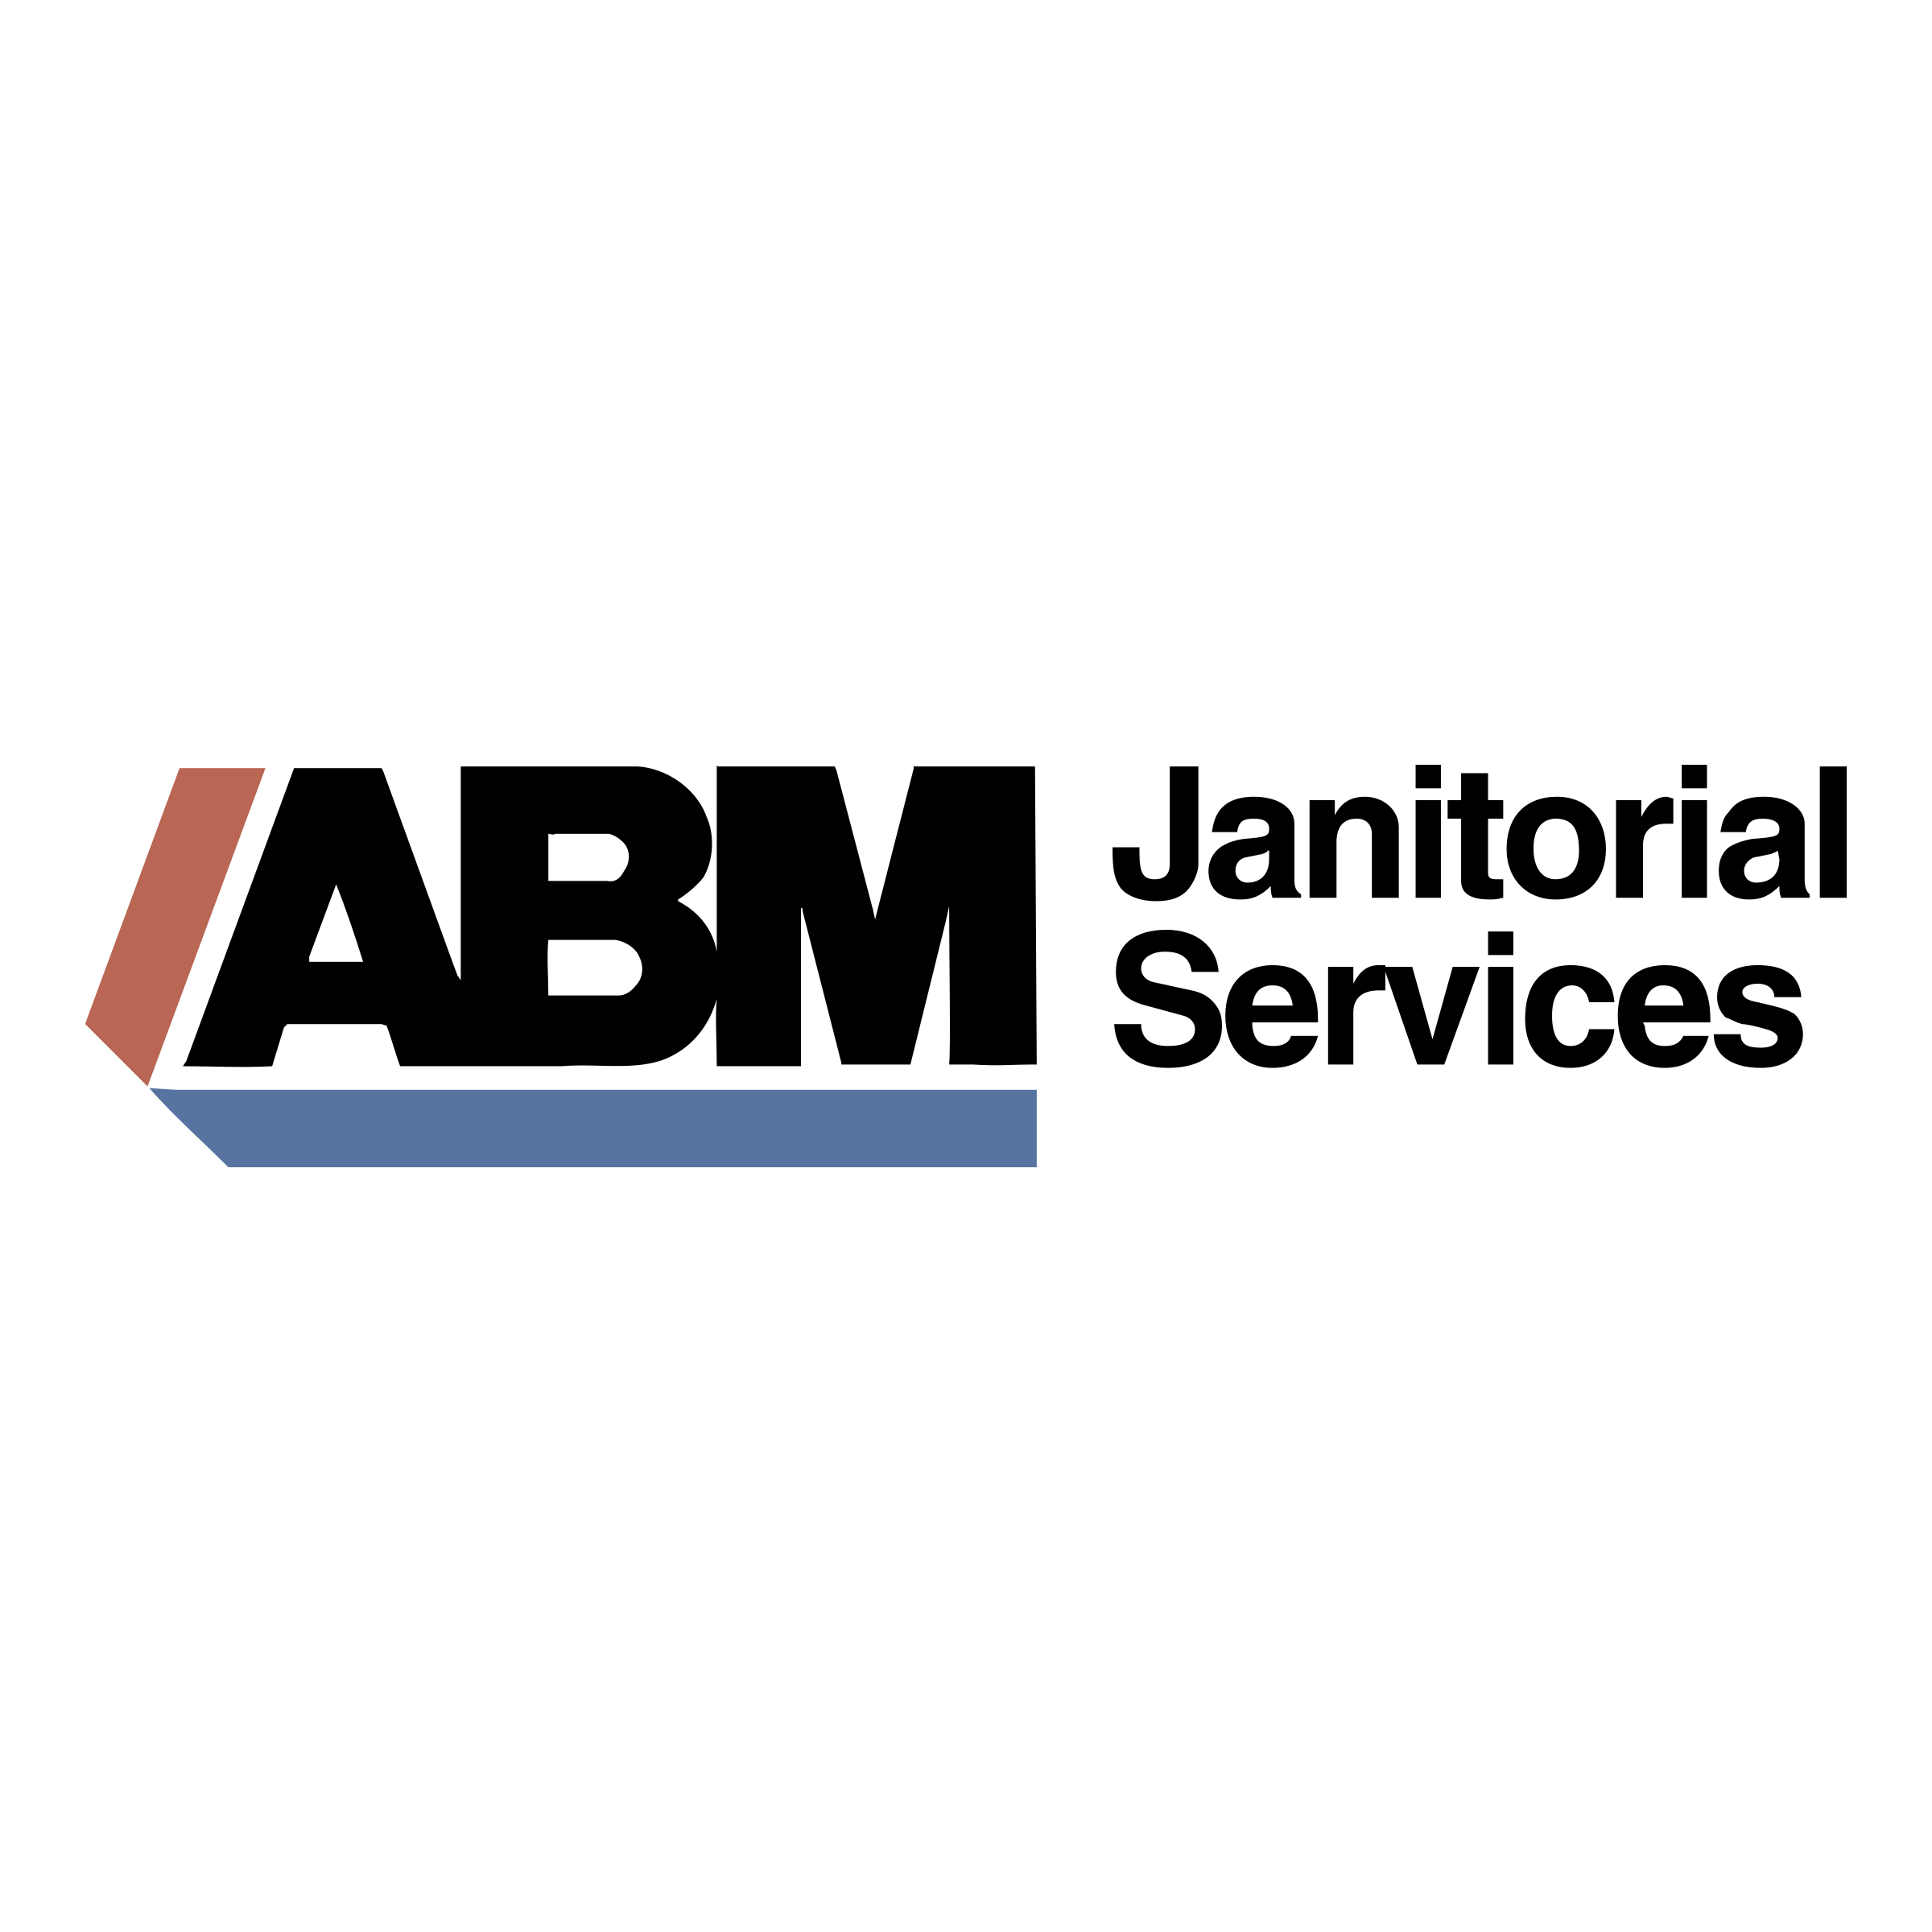 Janitorial Logo - ABM Janitorial Services Logo PNG Transparent & SVG Vector